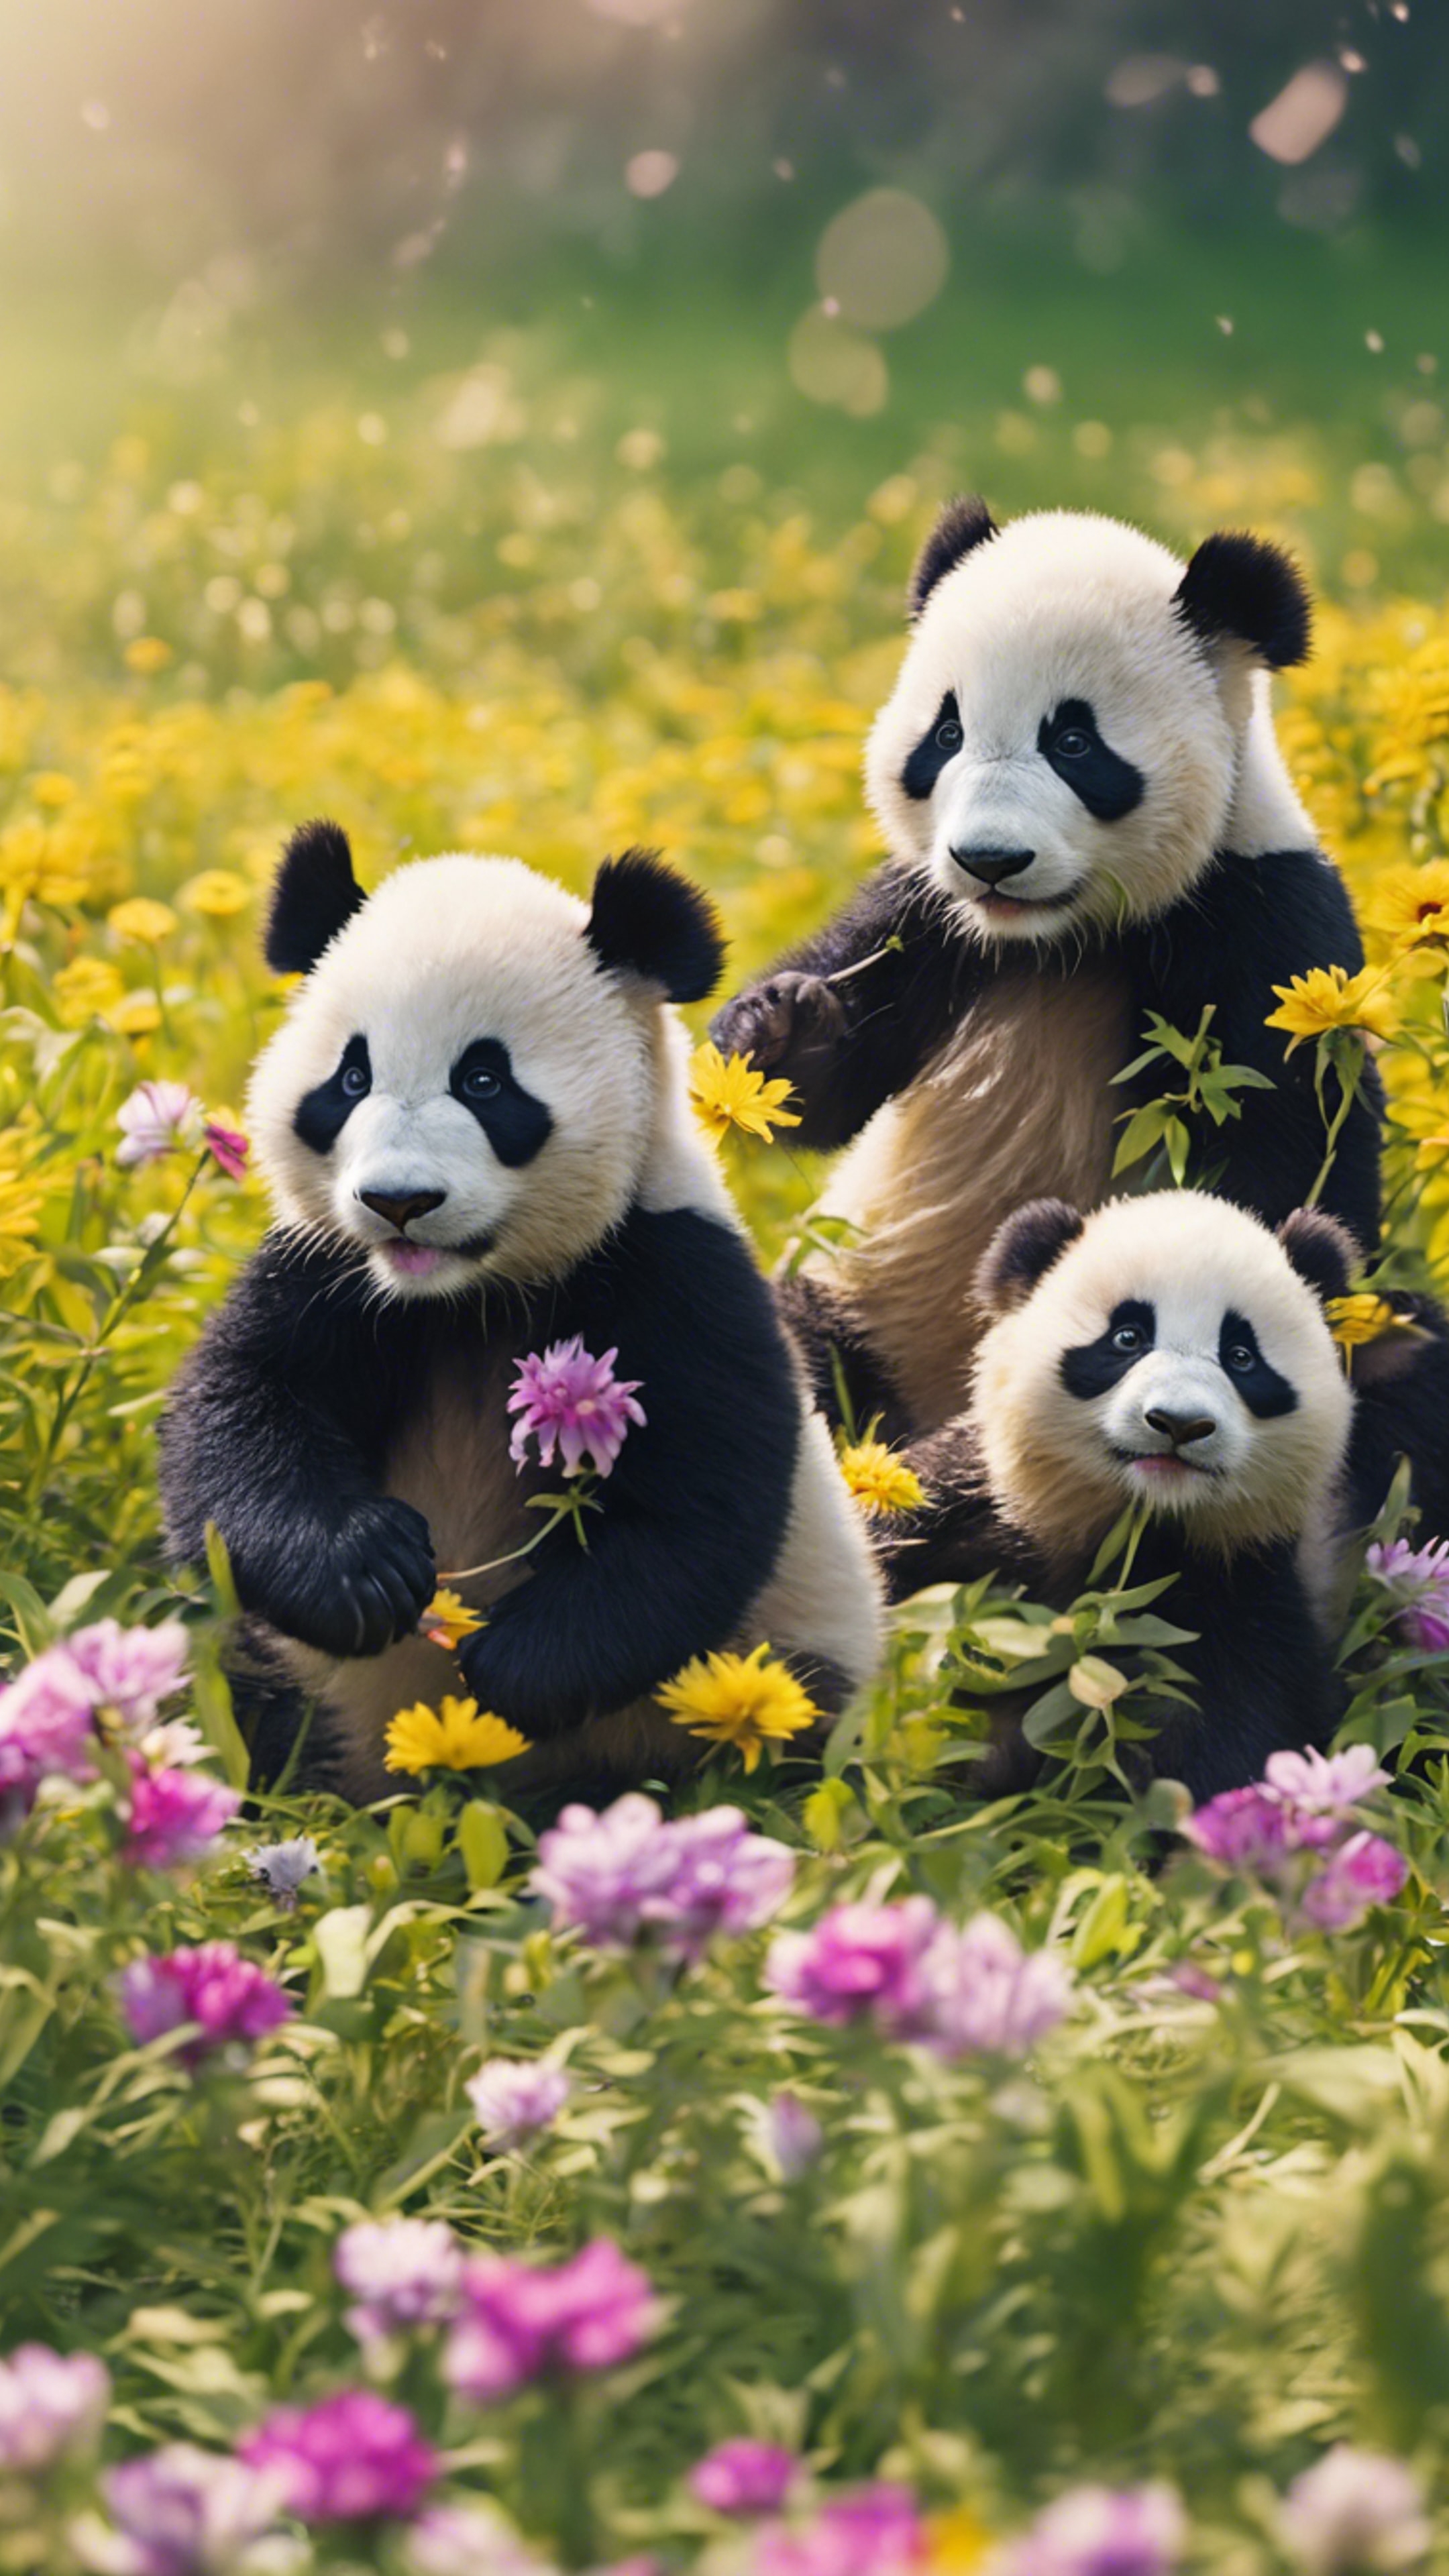 A group of lively panda cubs merrily playing tag in a field full of bright spring flowers. Tapeta[9de4fa100eef4aefa43d]